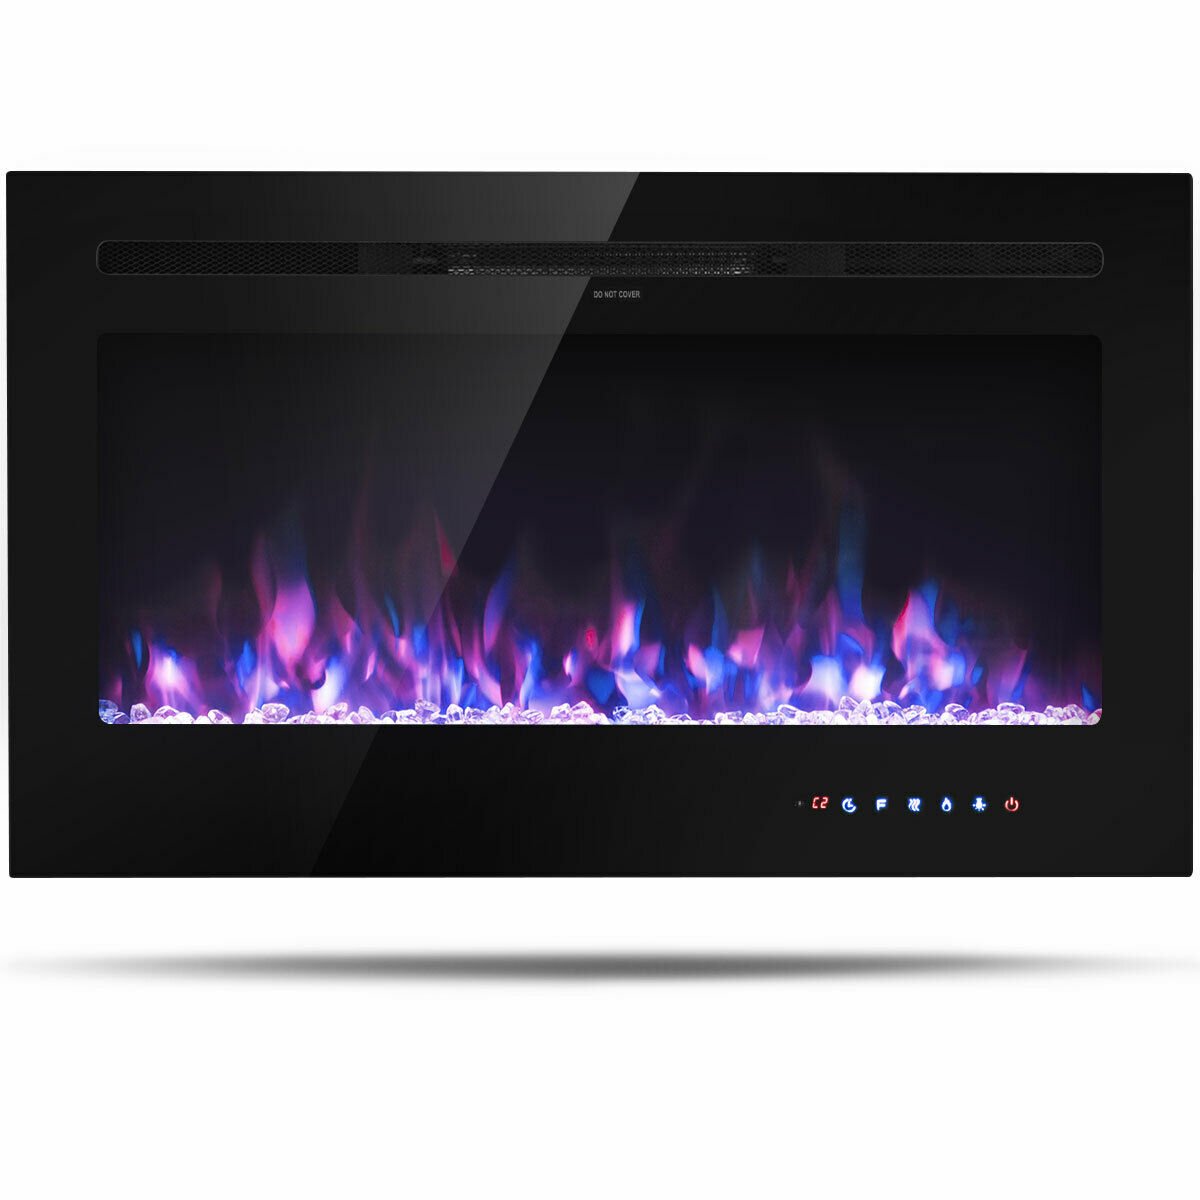 36'' Electric Fireplace Recessed And Wall Mounted 750W/1500W W/ Multicolor Flame